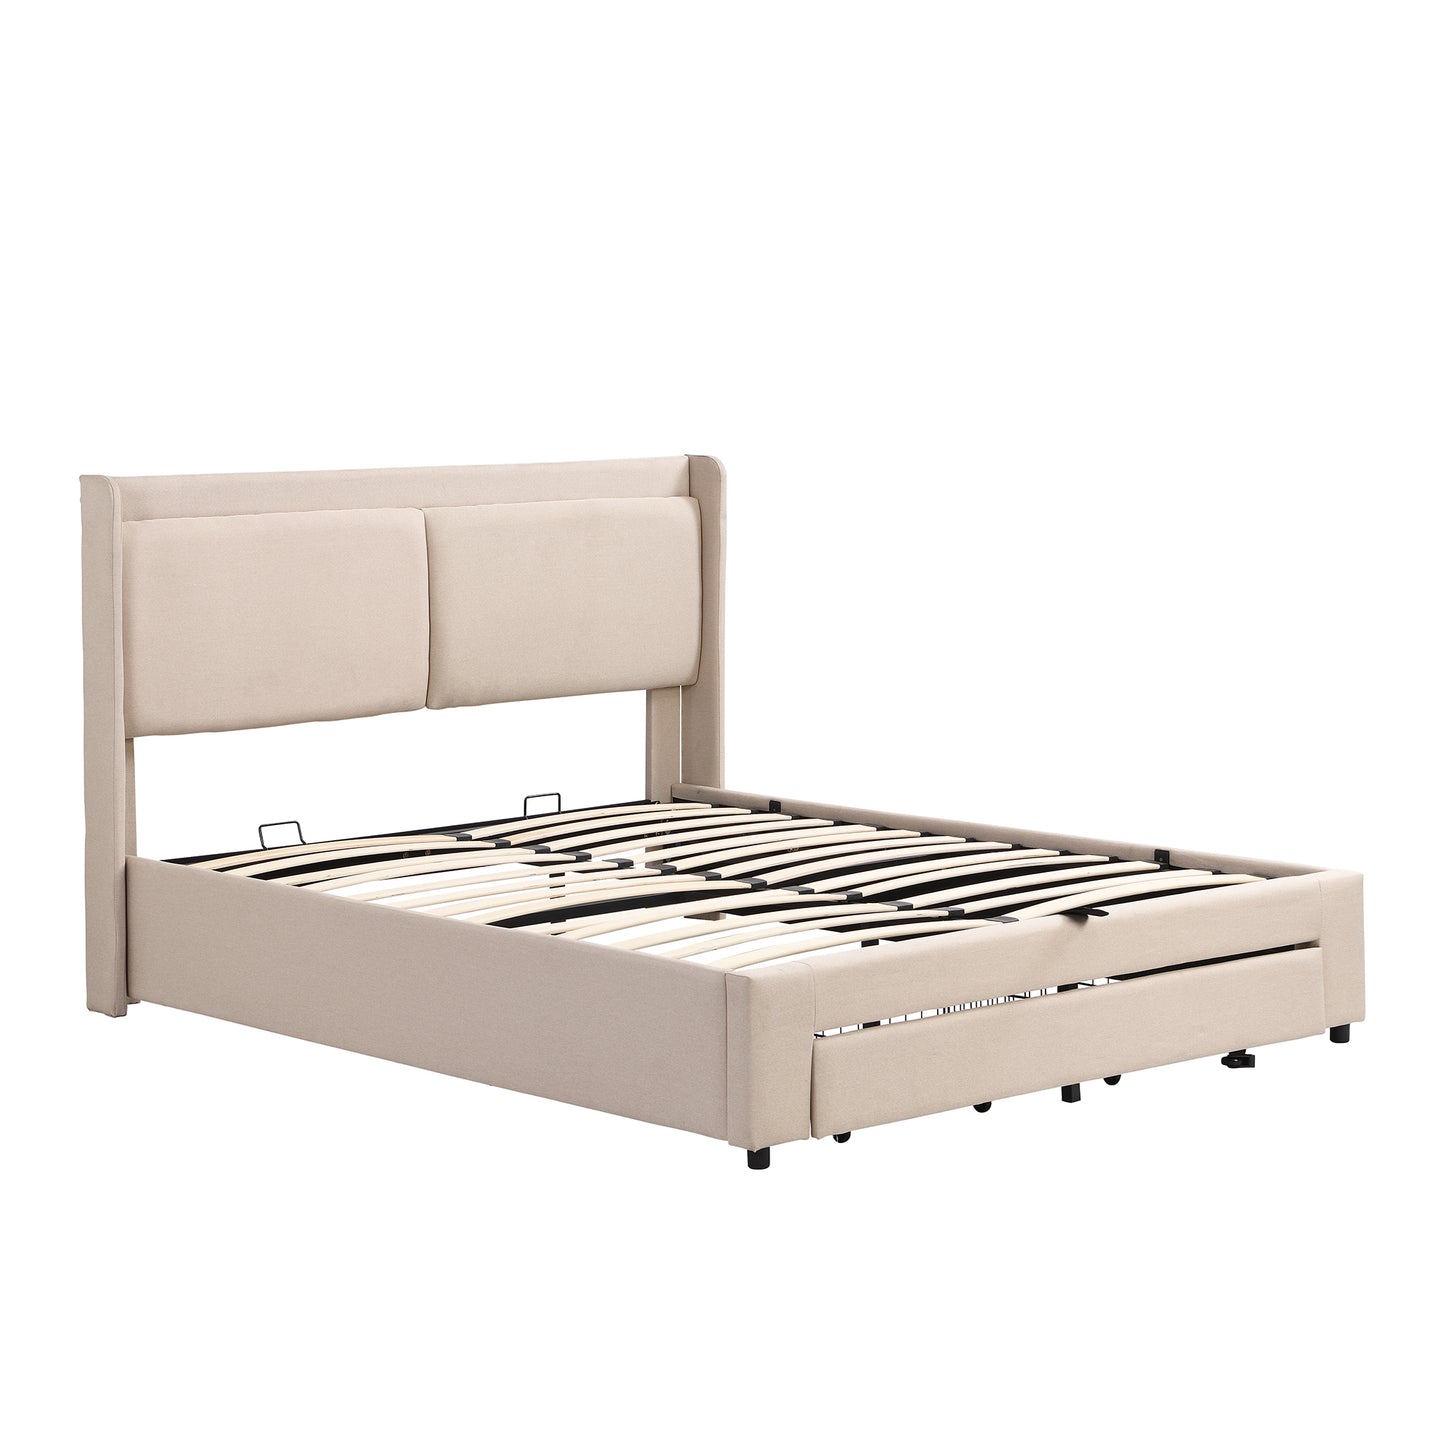 Queen Size Storage Upholstered Hydraulic Platform Bed with 2 Drawers, Beige